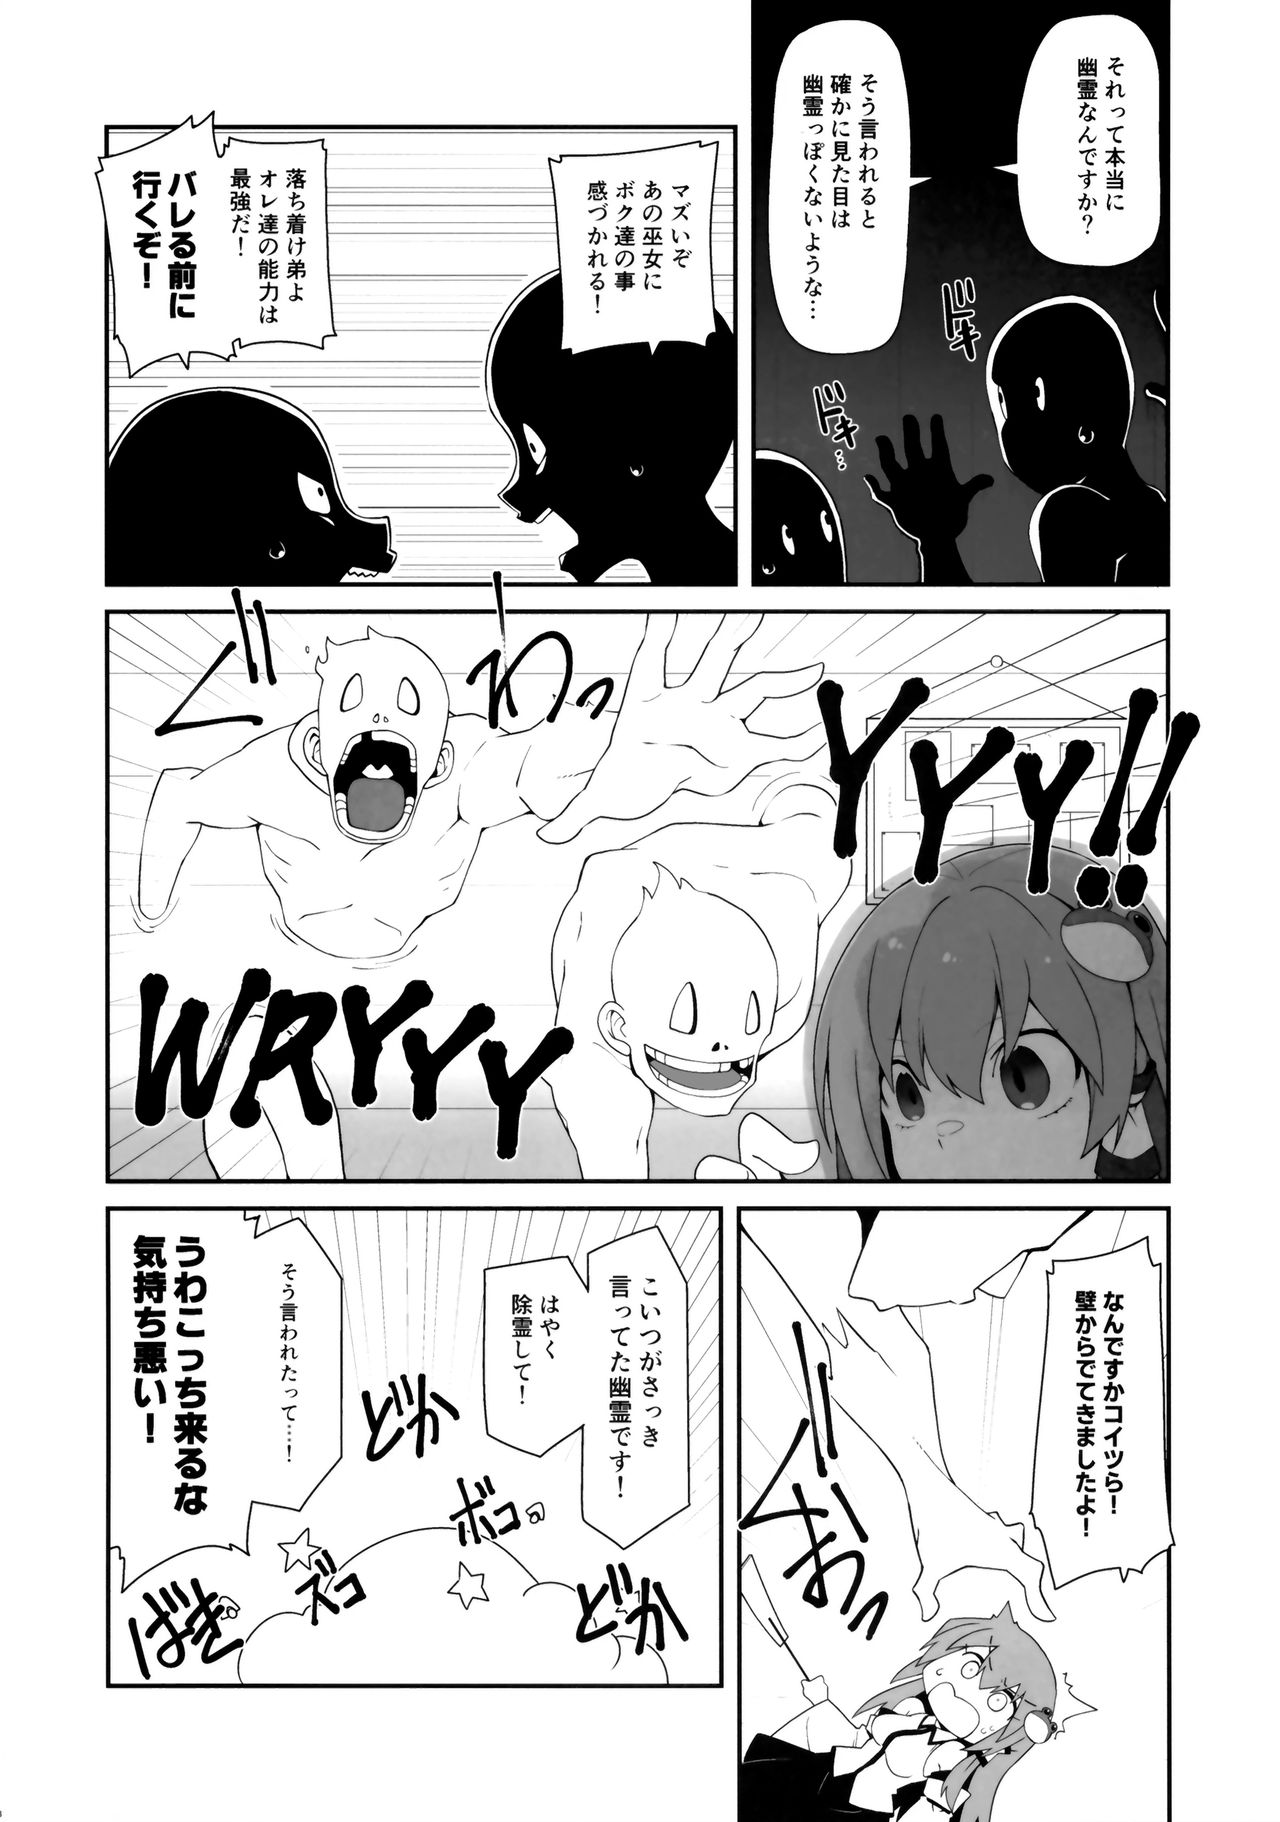 (C96) [Cola Bolt (Kotomuke Fuurin)] RE: I AM (Touhou Project) page 19 full